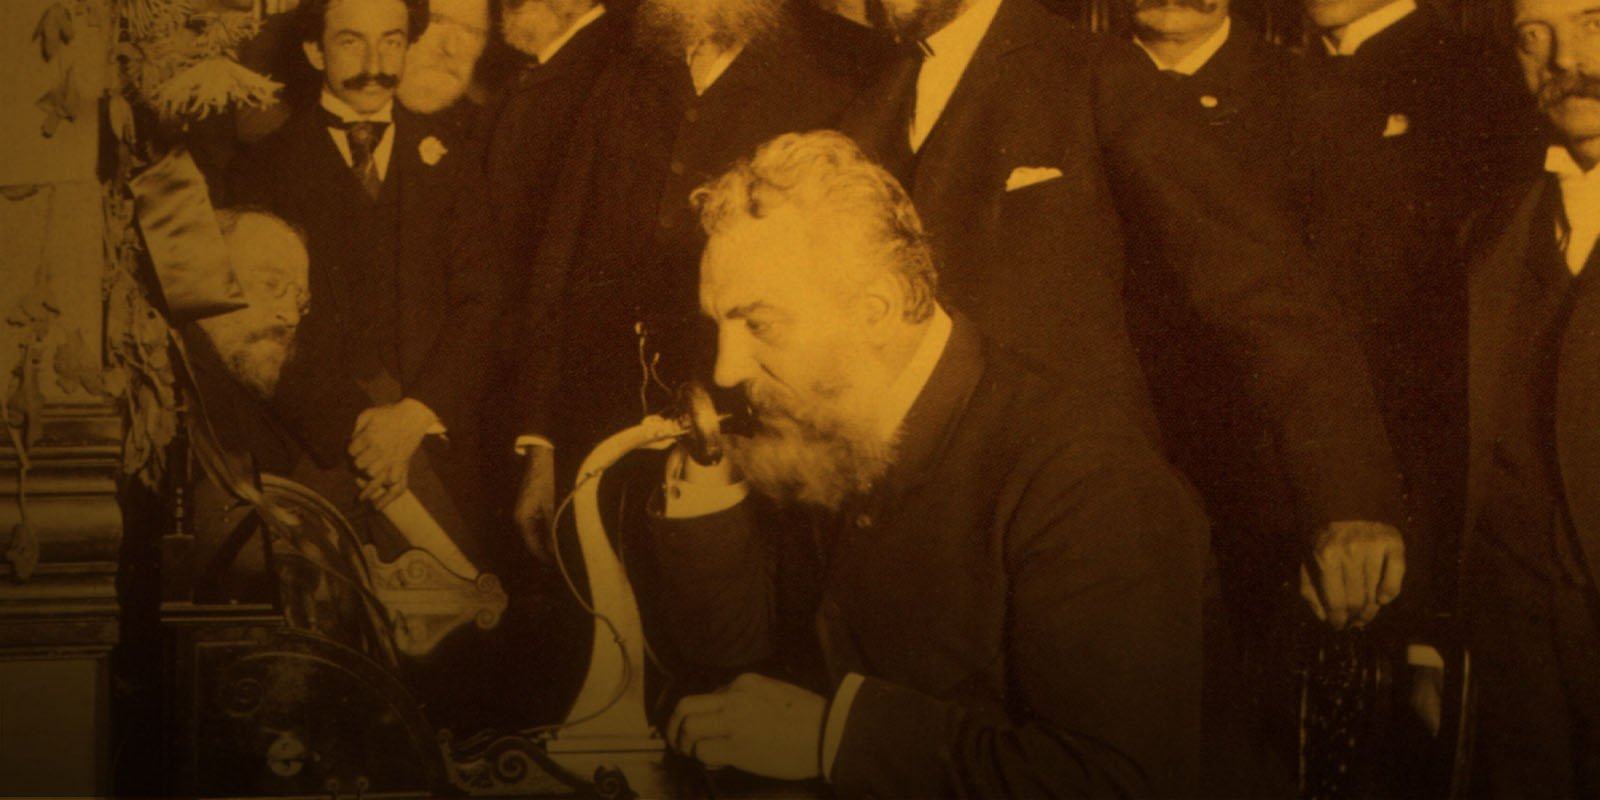 ALEXANDER GRAHAM BELL – A PENCHANT FOR INVENTION